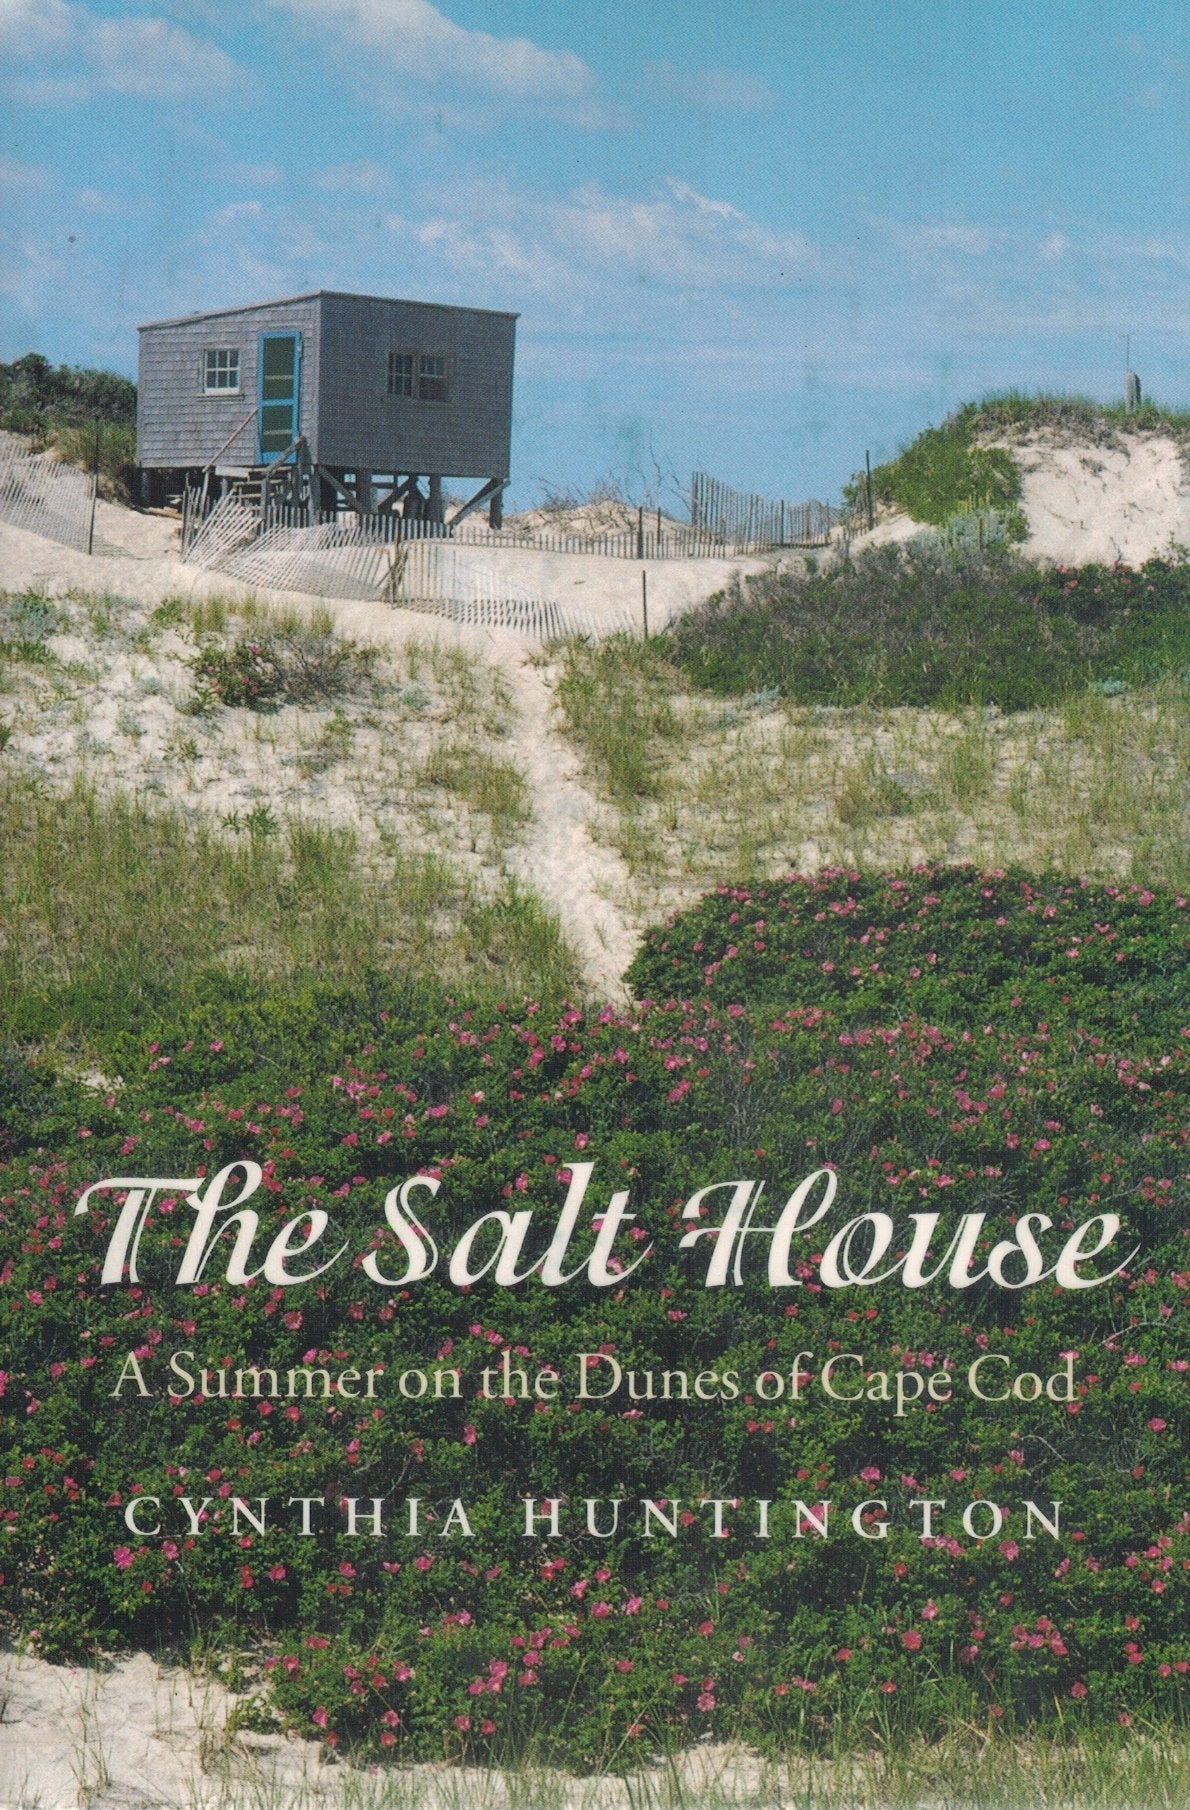 THE SALT HOUSE  A Summer on the Dunes of Cape Cod - books-new